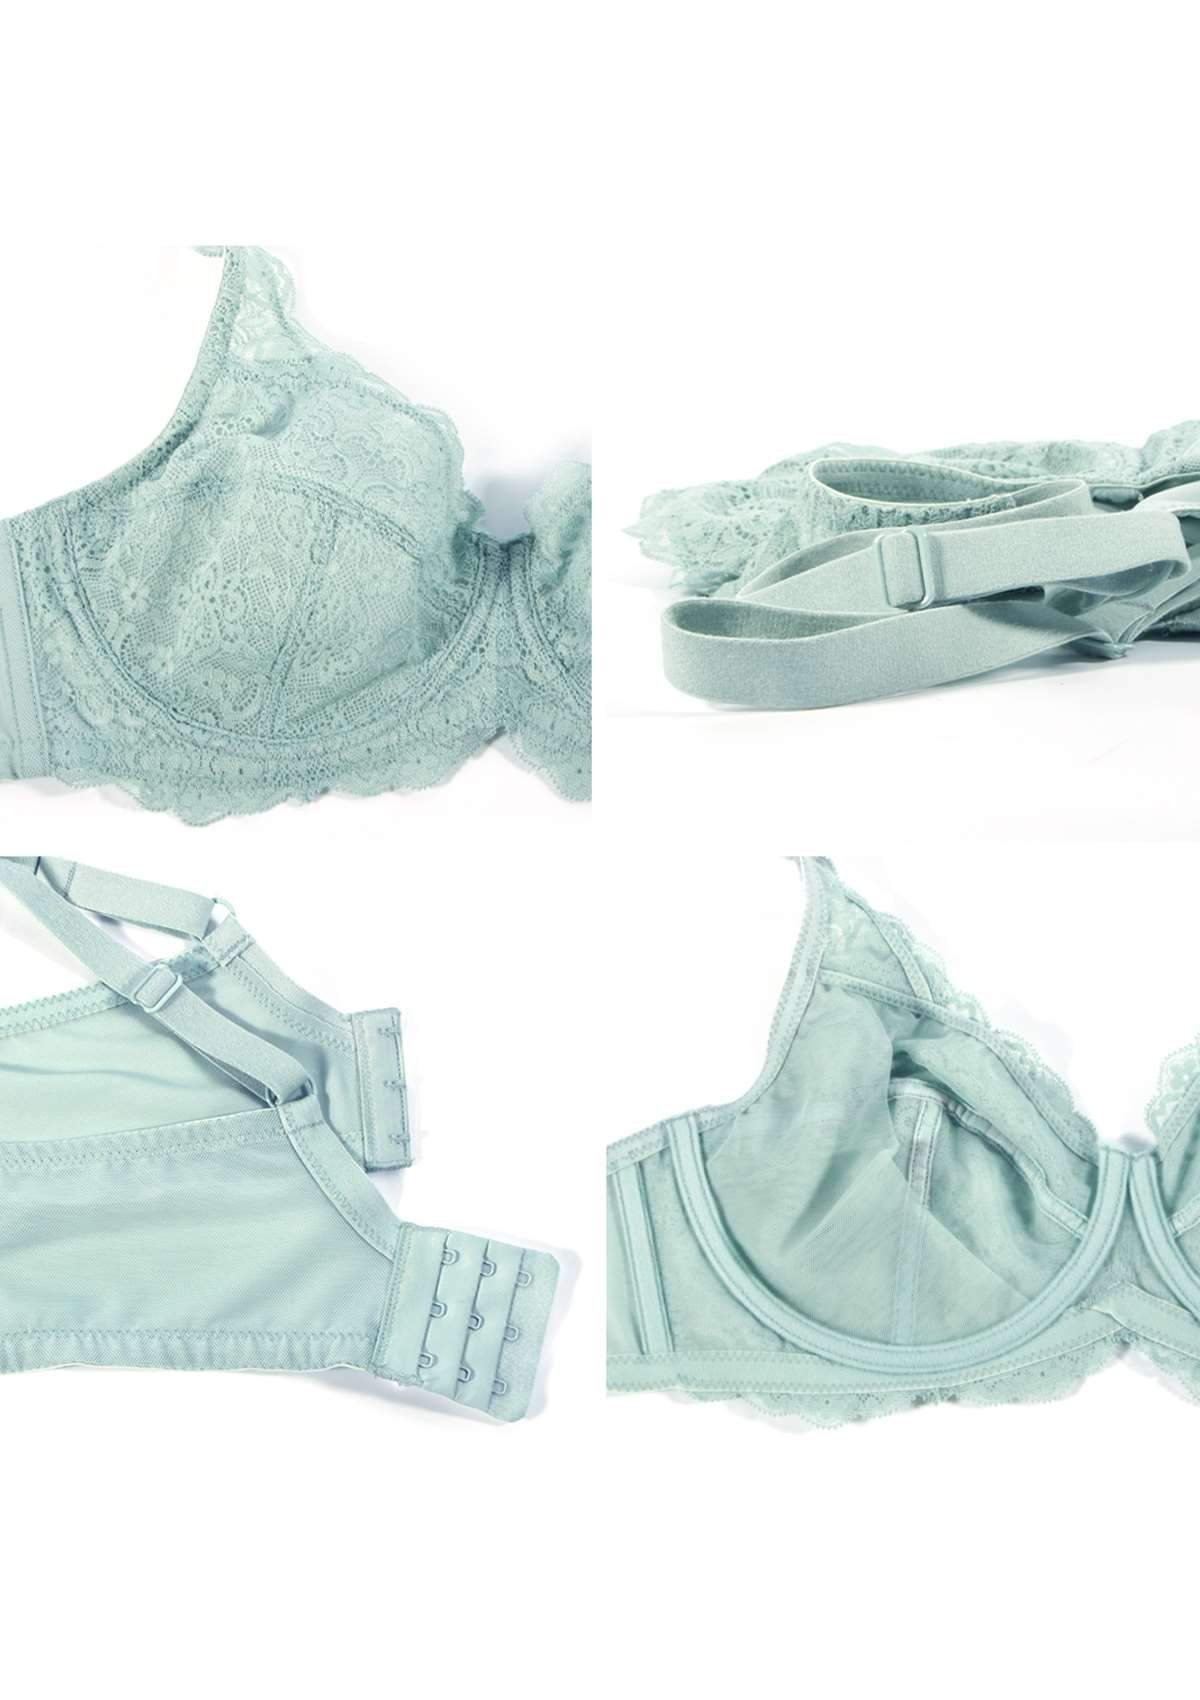 HSIA All-Over Floral Lace: Best Bra For Elderly With Sagging Breasts - Pewter Blue / 42 / C